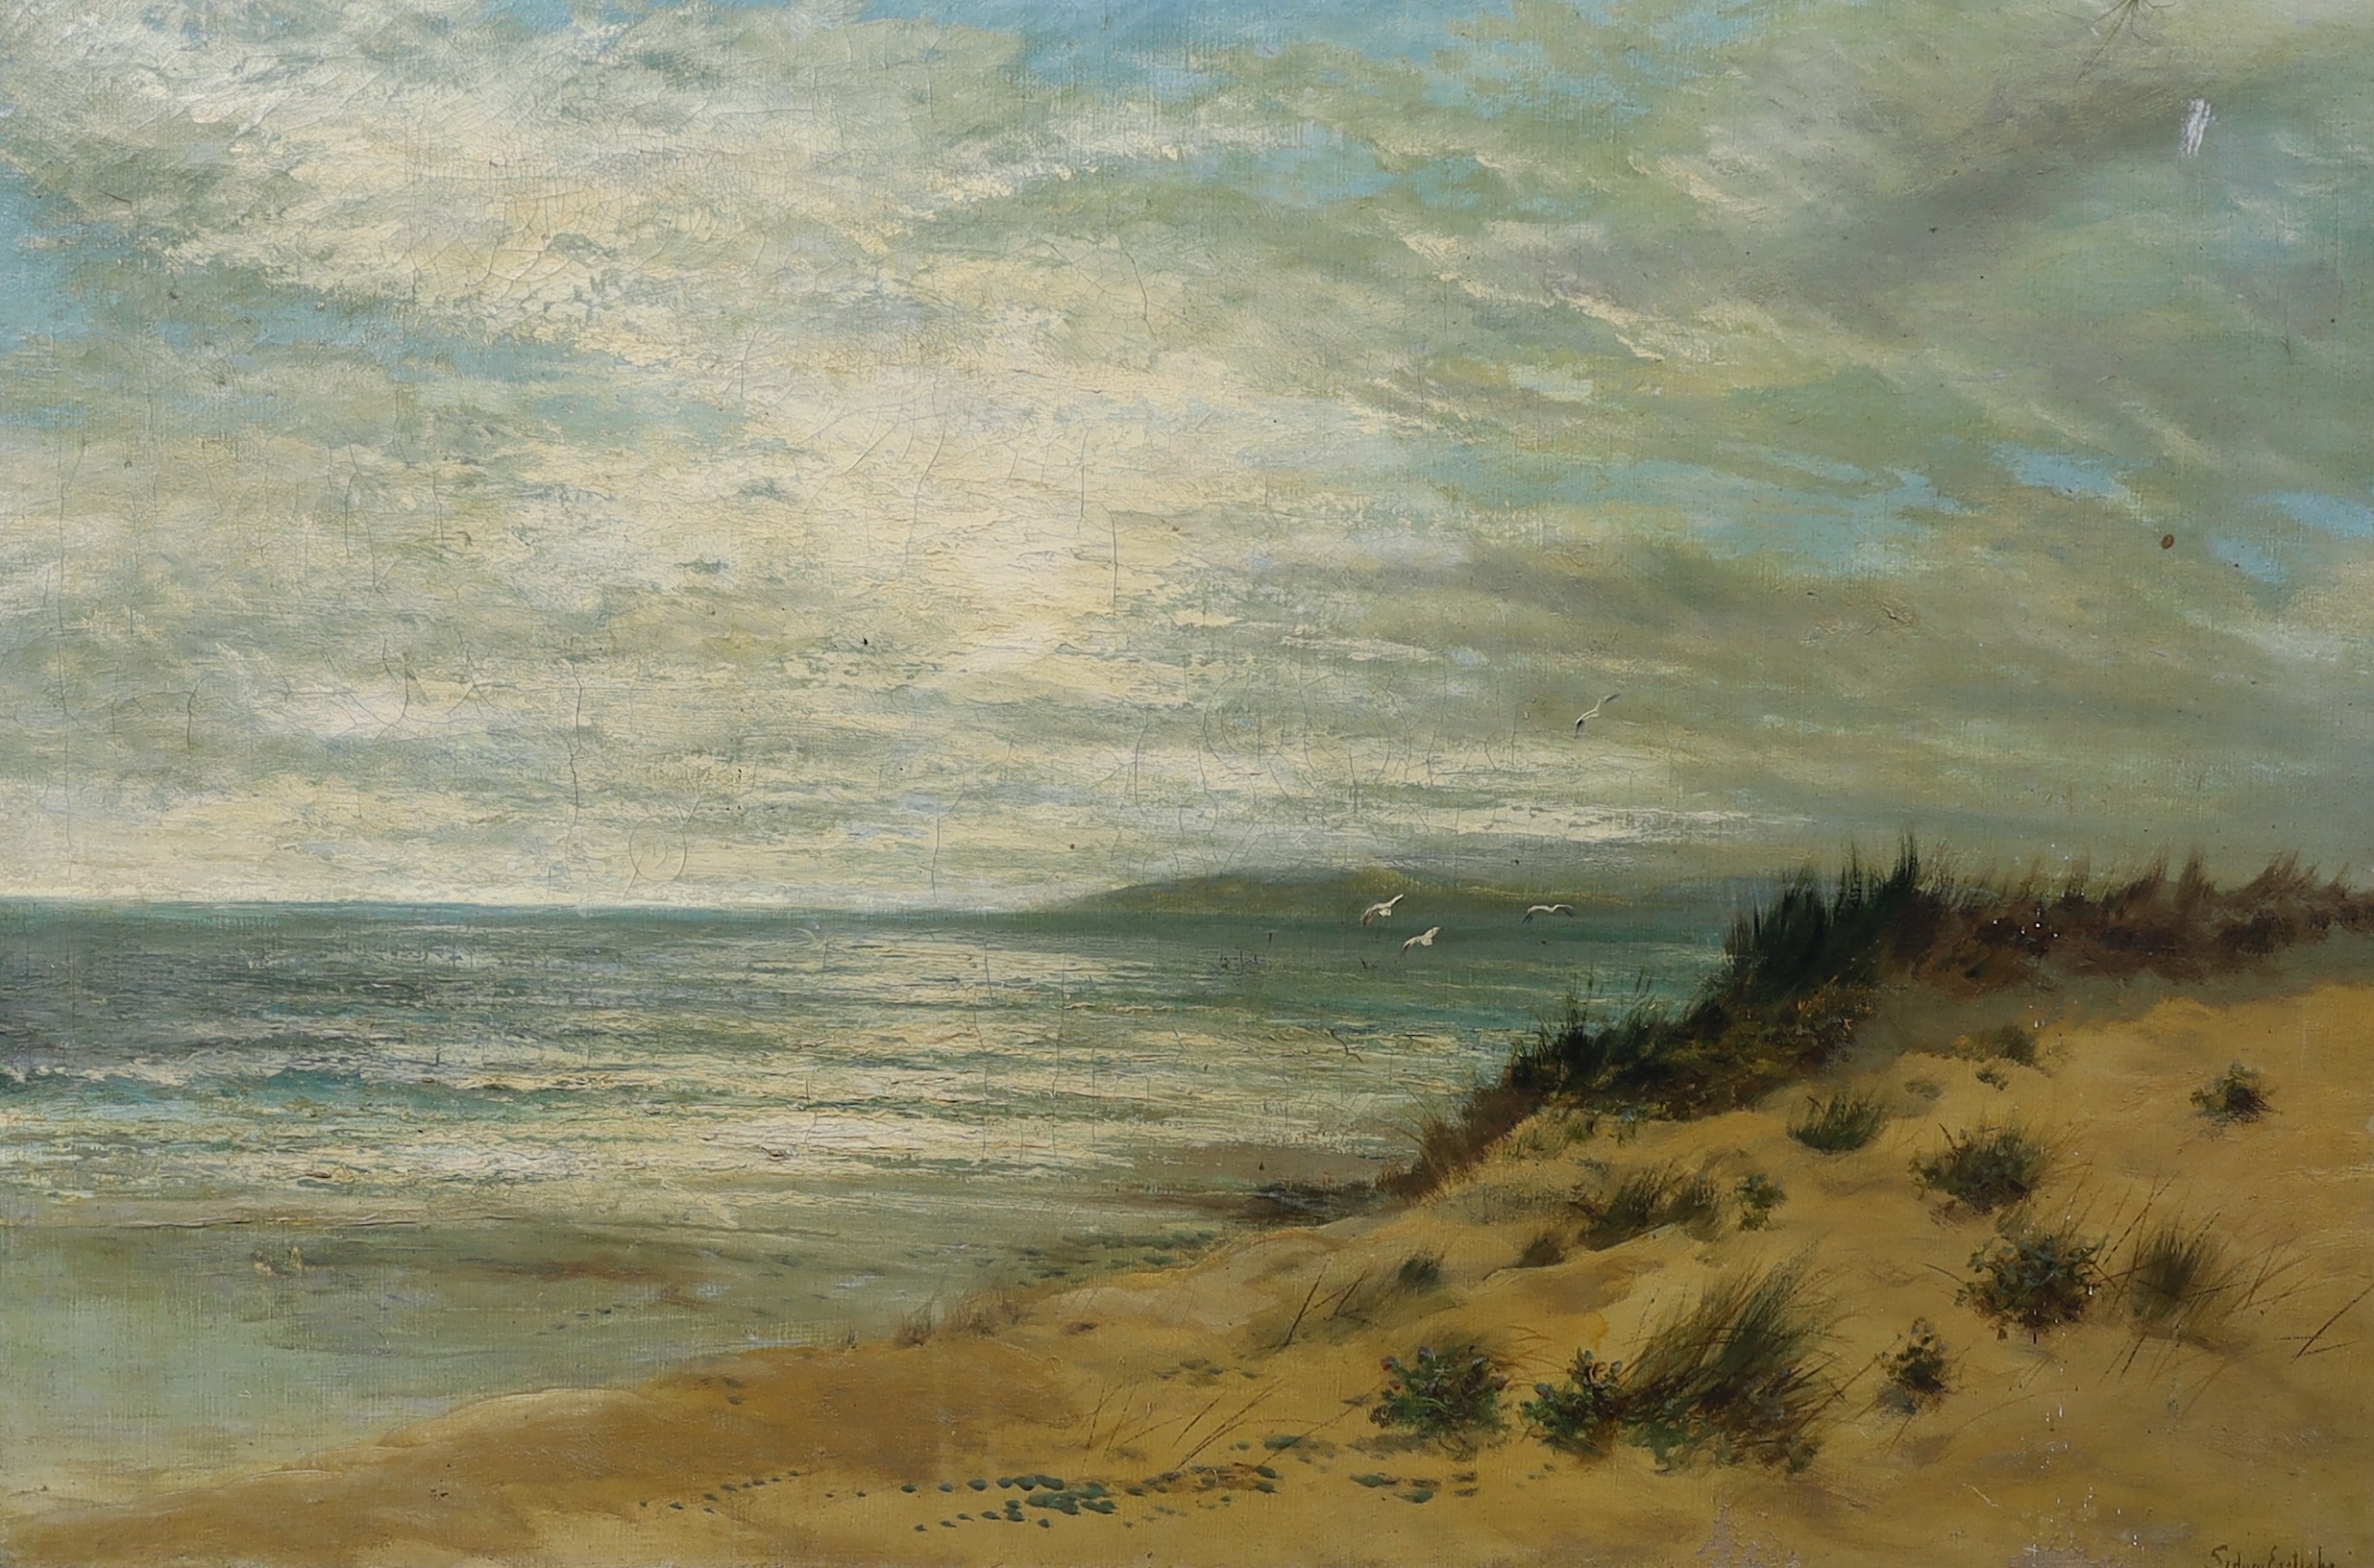 Sidney Eastlake (19th.C), oil on canvas, Coastal scene with sand dunes, signed and dated 1905, 60 x 90cm. Condition - poor to fair, dirt and craquelure all over